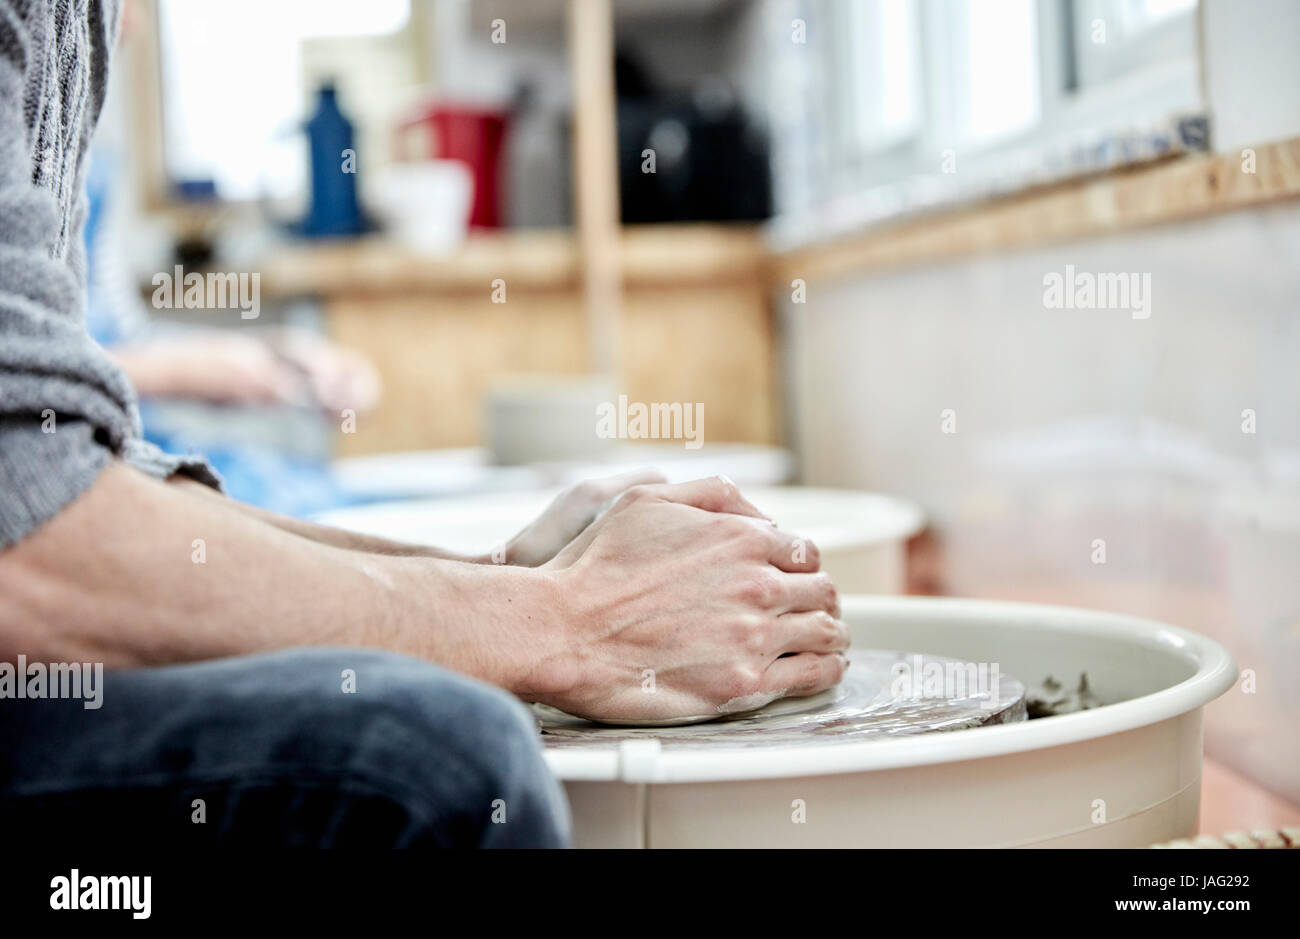 A man using a pottery wheel, with his hands on the clay, throwing pots in a pottery studio. Stock Photo